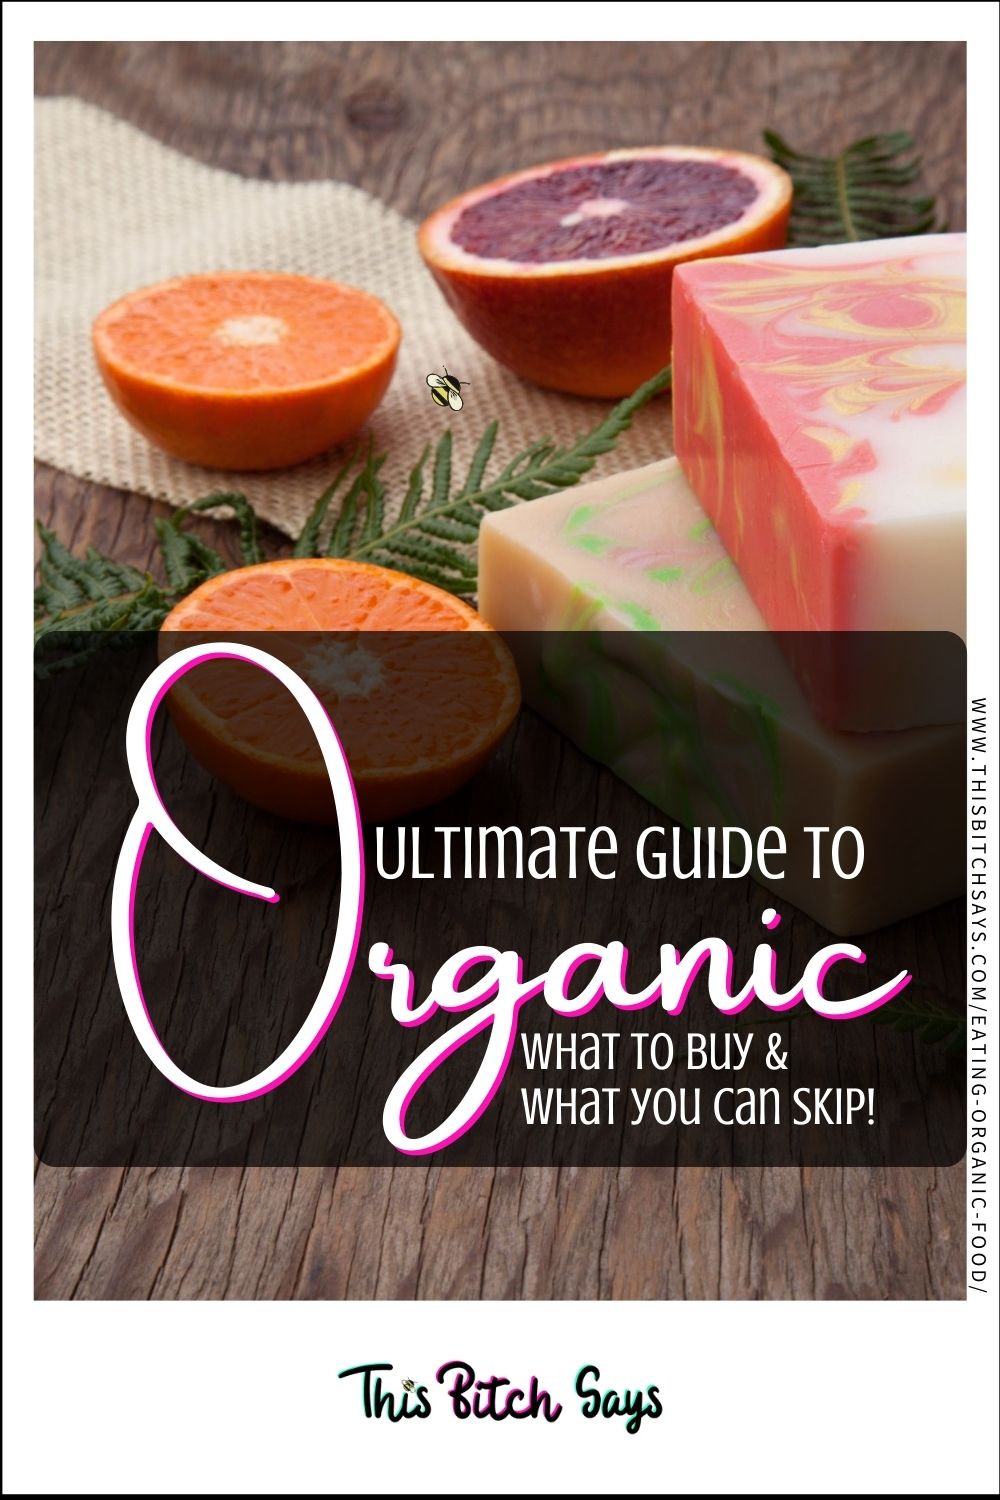 CLICK FOR: Ultimate guide to ORGANIC (what to buy and what you can skip)